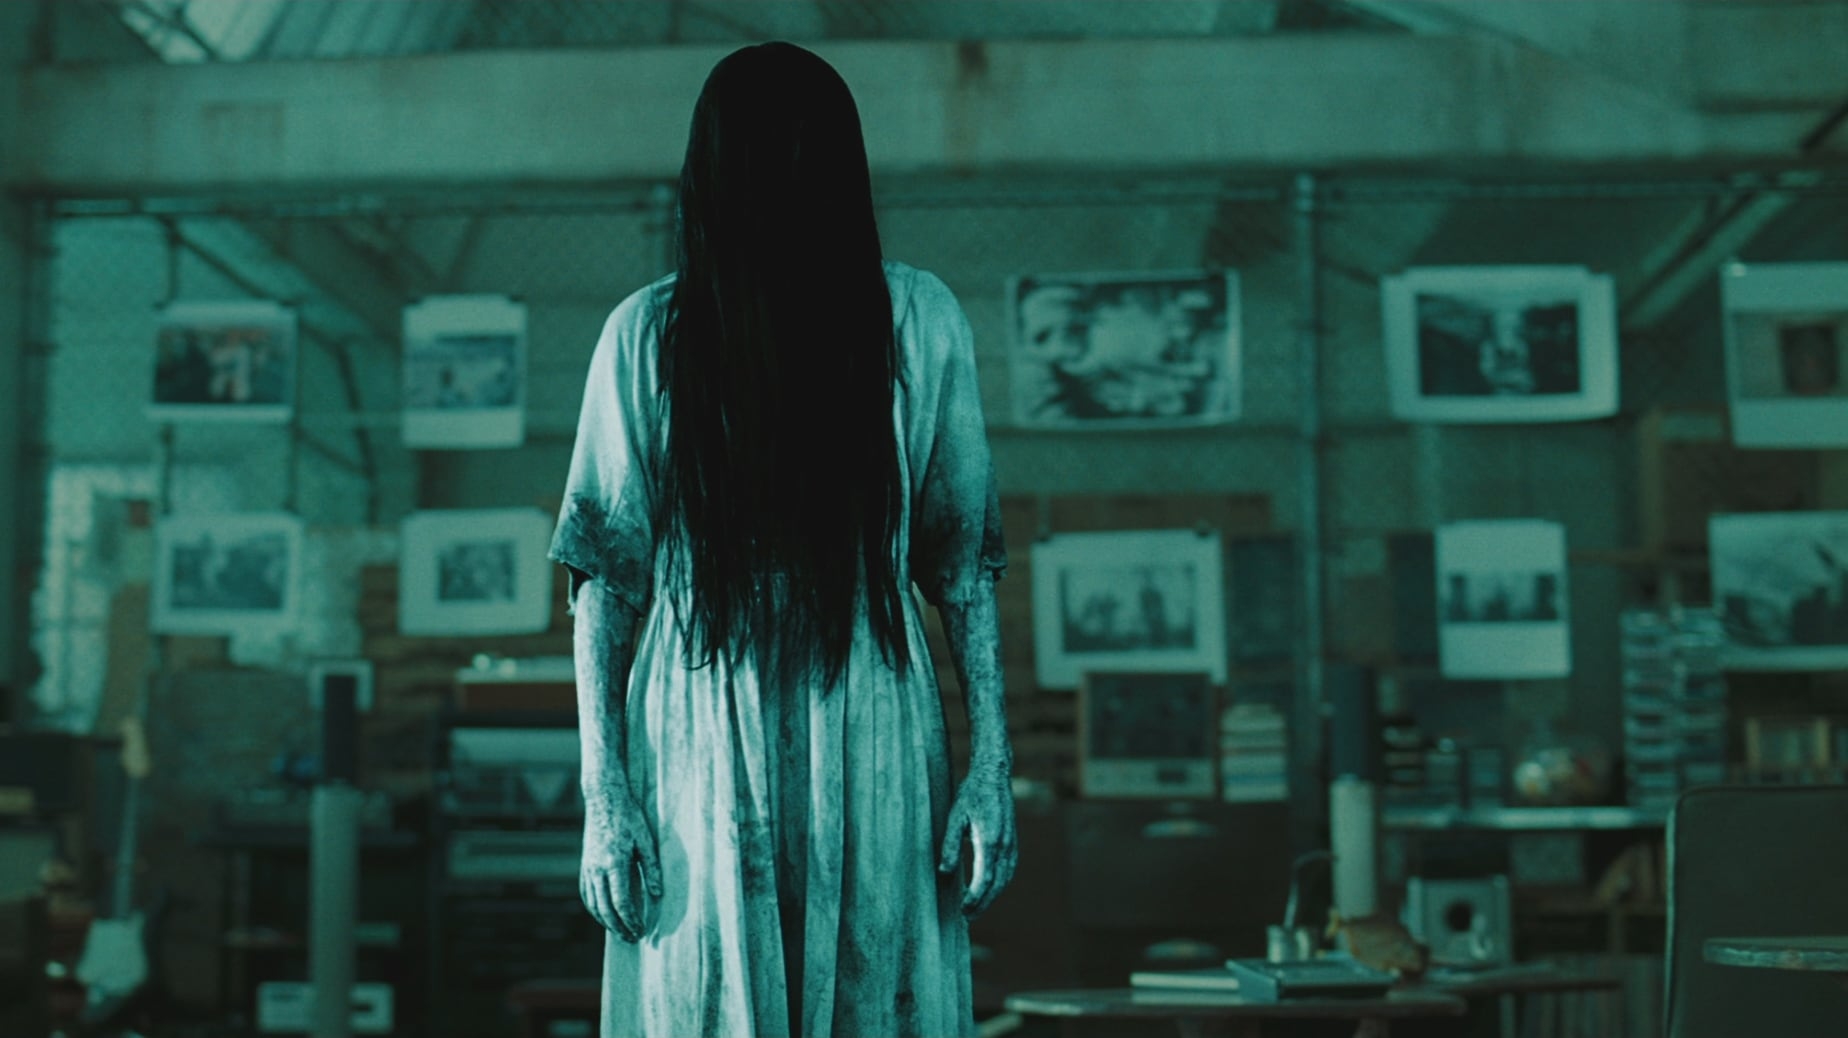 The Ring (The Ring)